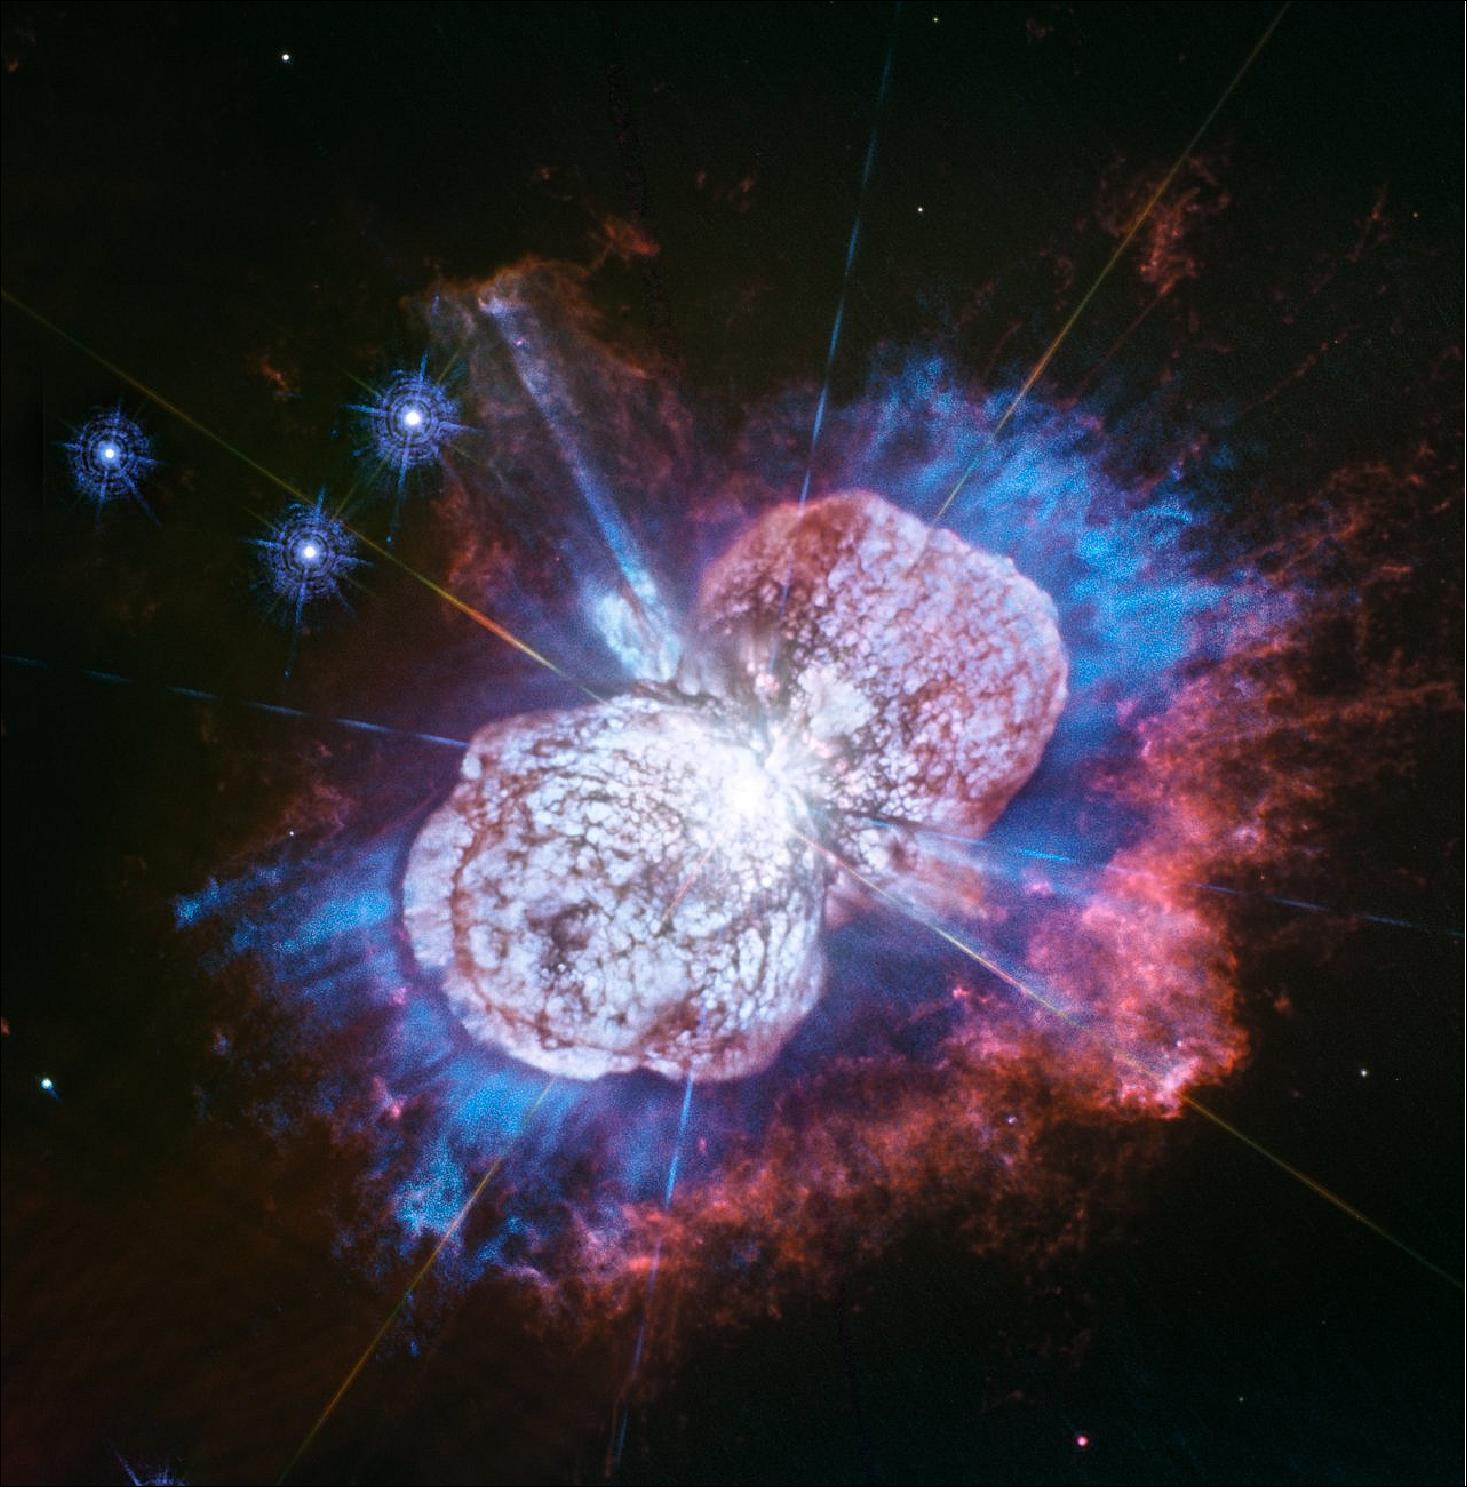 Figure 41: Hubble offers a special view of the double star system Eta Carinae’s expanding gases glowing in red, white, and blue. This is the highest resolution image of Eta Carinae taken by the NASA/ESA Hubble Space Telescope [image credit: NASA/ESA, N. Smith (University of Arizona, Tucson), and J. Morse (BoldlyGo Institute, New York)]